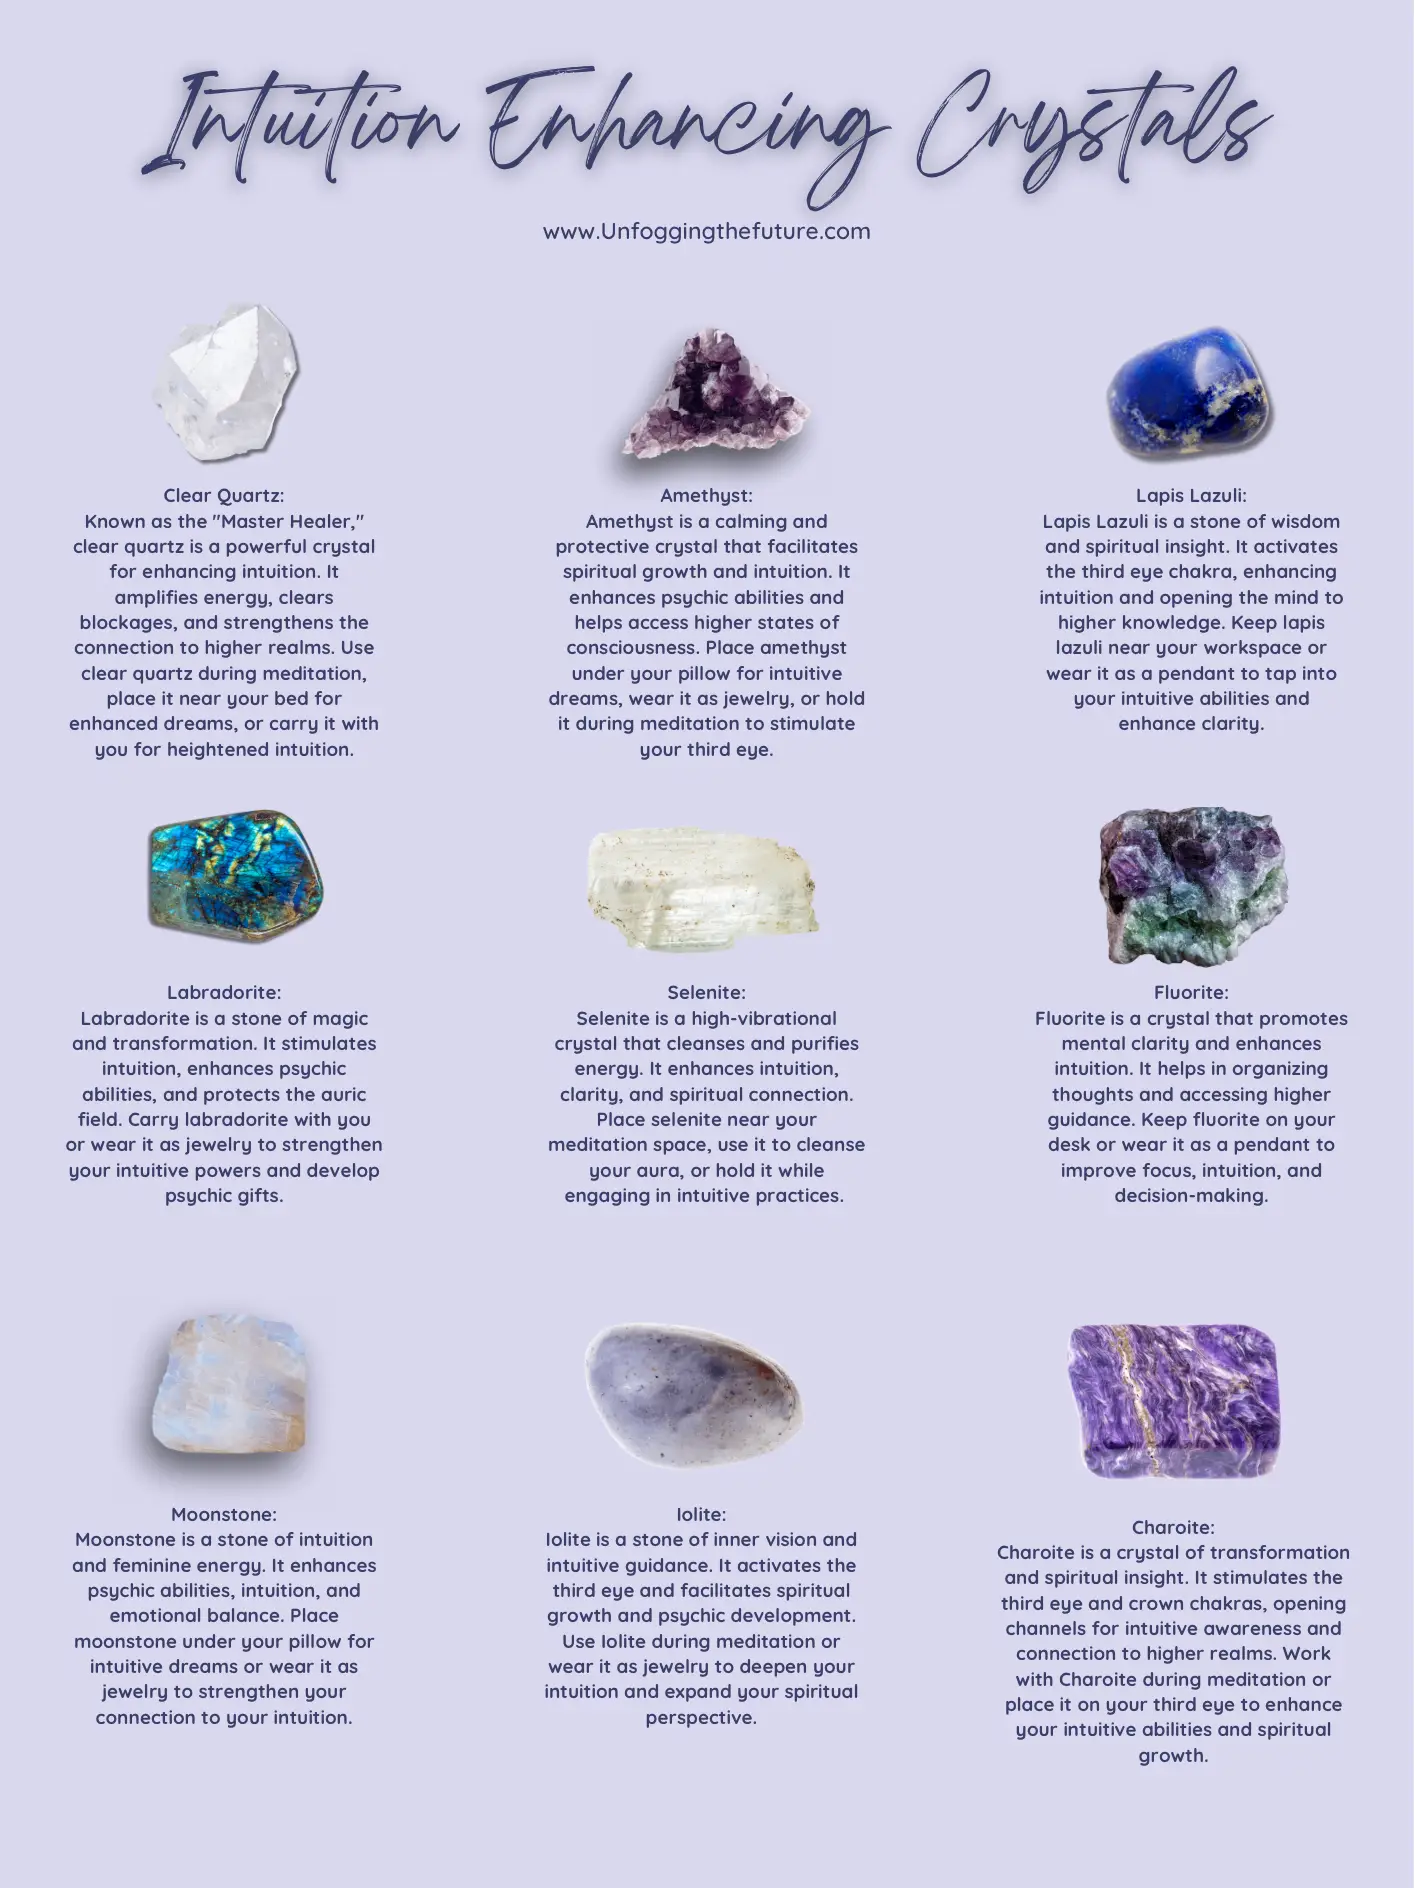 How to Wear Amethyst Crystal Jewelry for Spiritual Growth - Dance